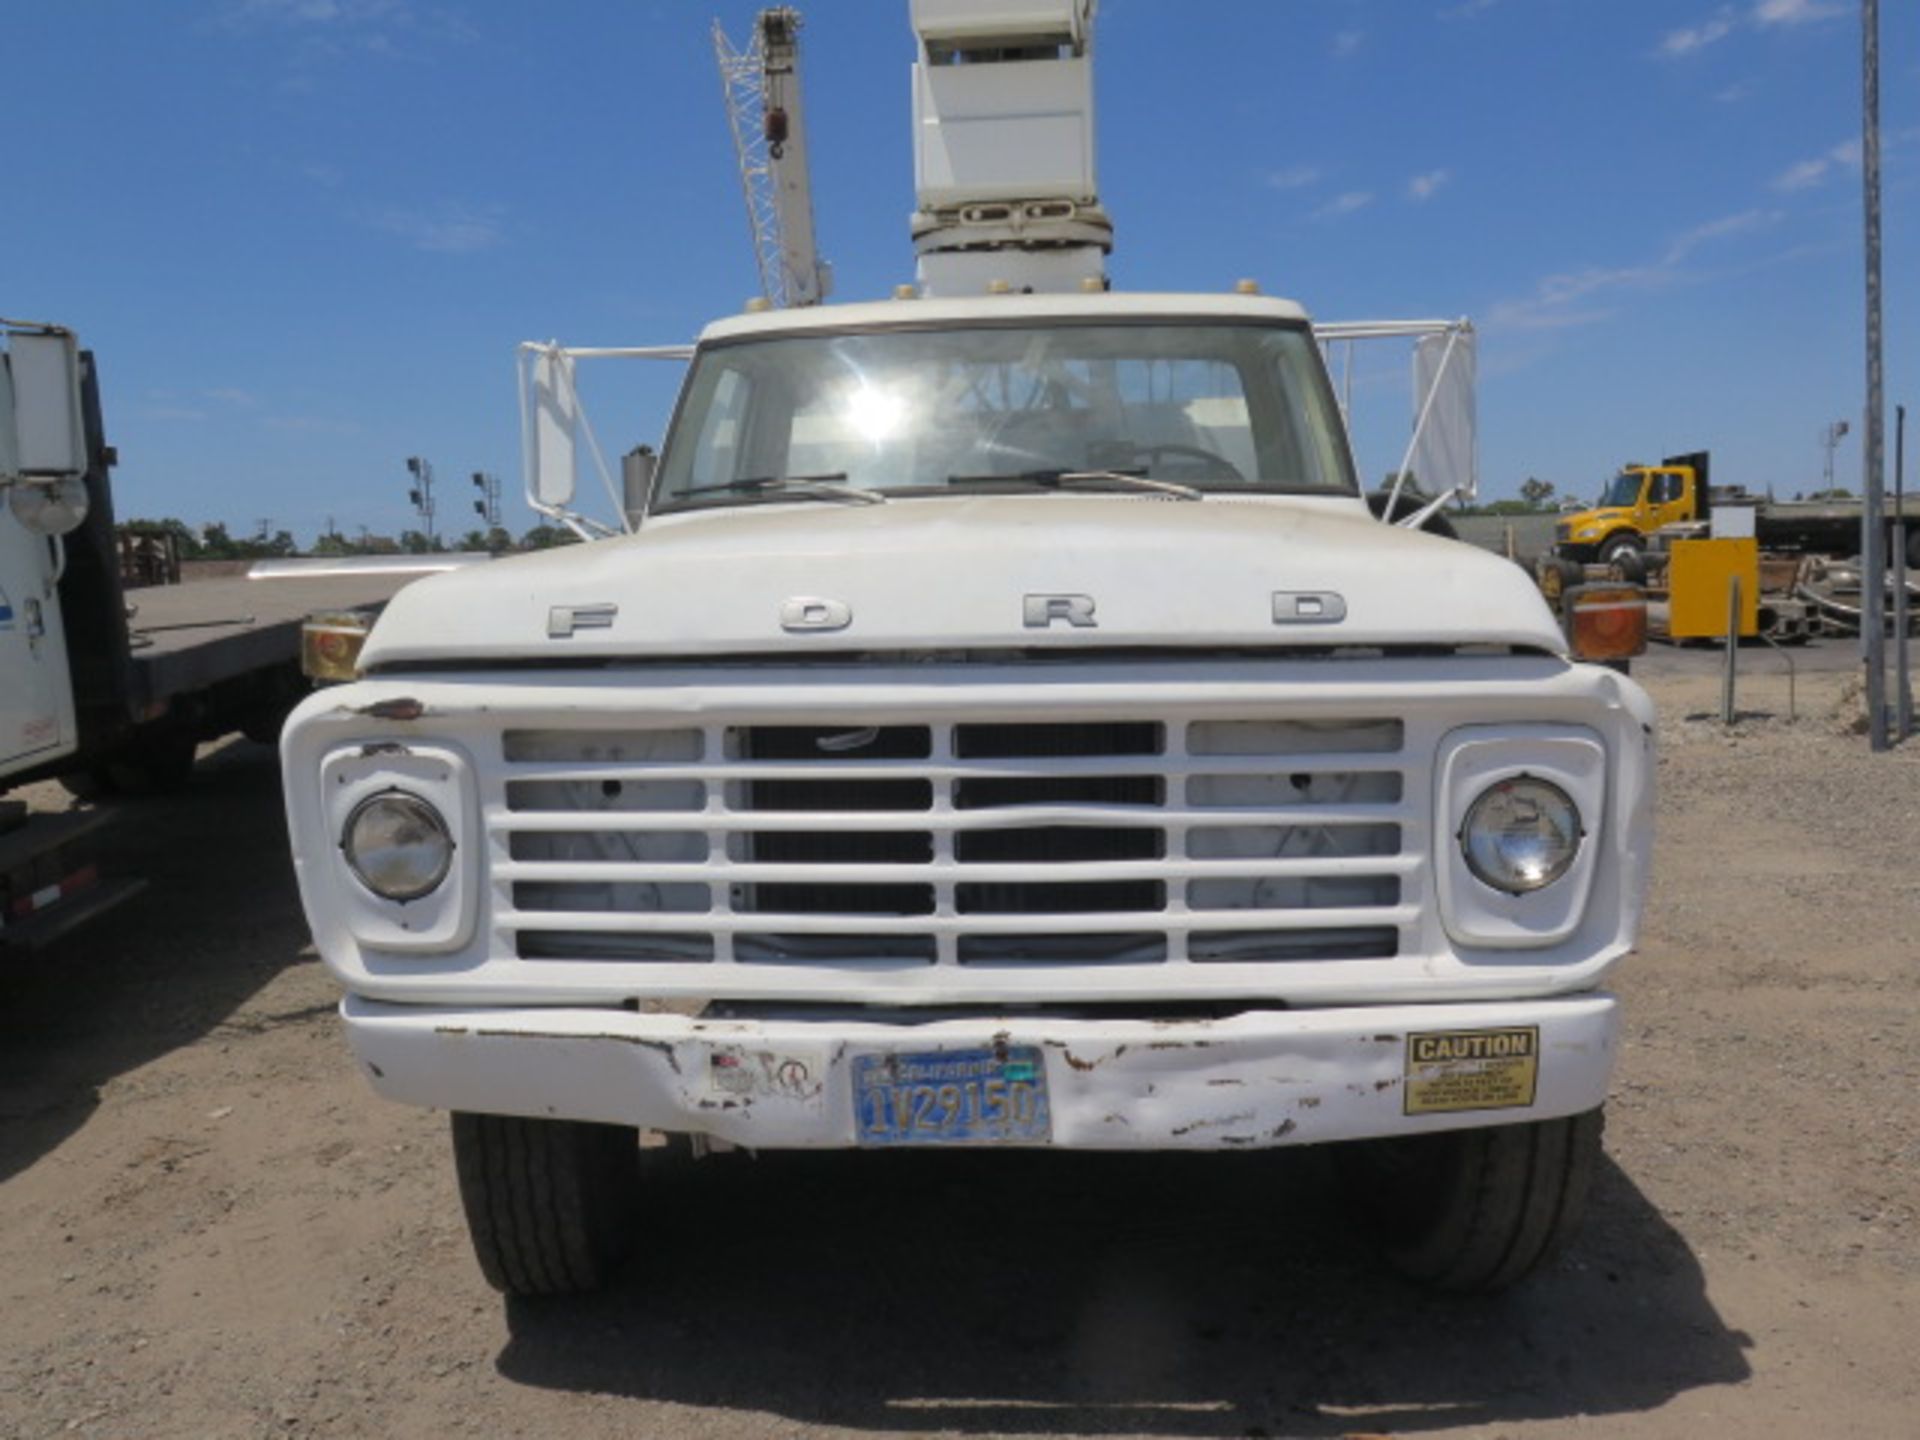 1979 Ford F800 Boom Truck, w/ 370-4V GAS, 5-Speed Manual Trans, Pitman HL-800, SOLD AS IS - Image 2 of 20